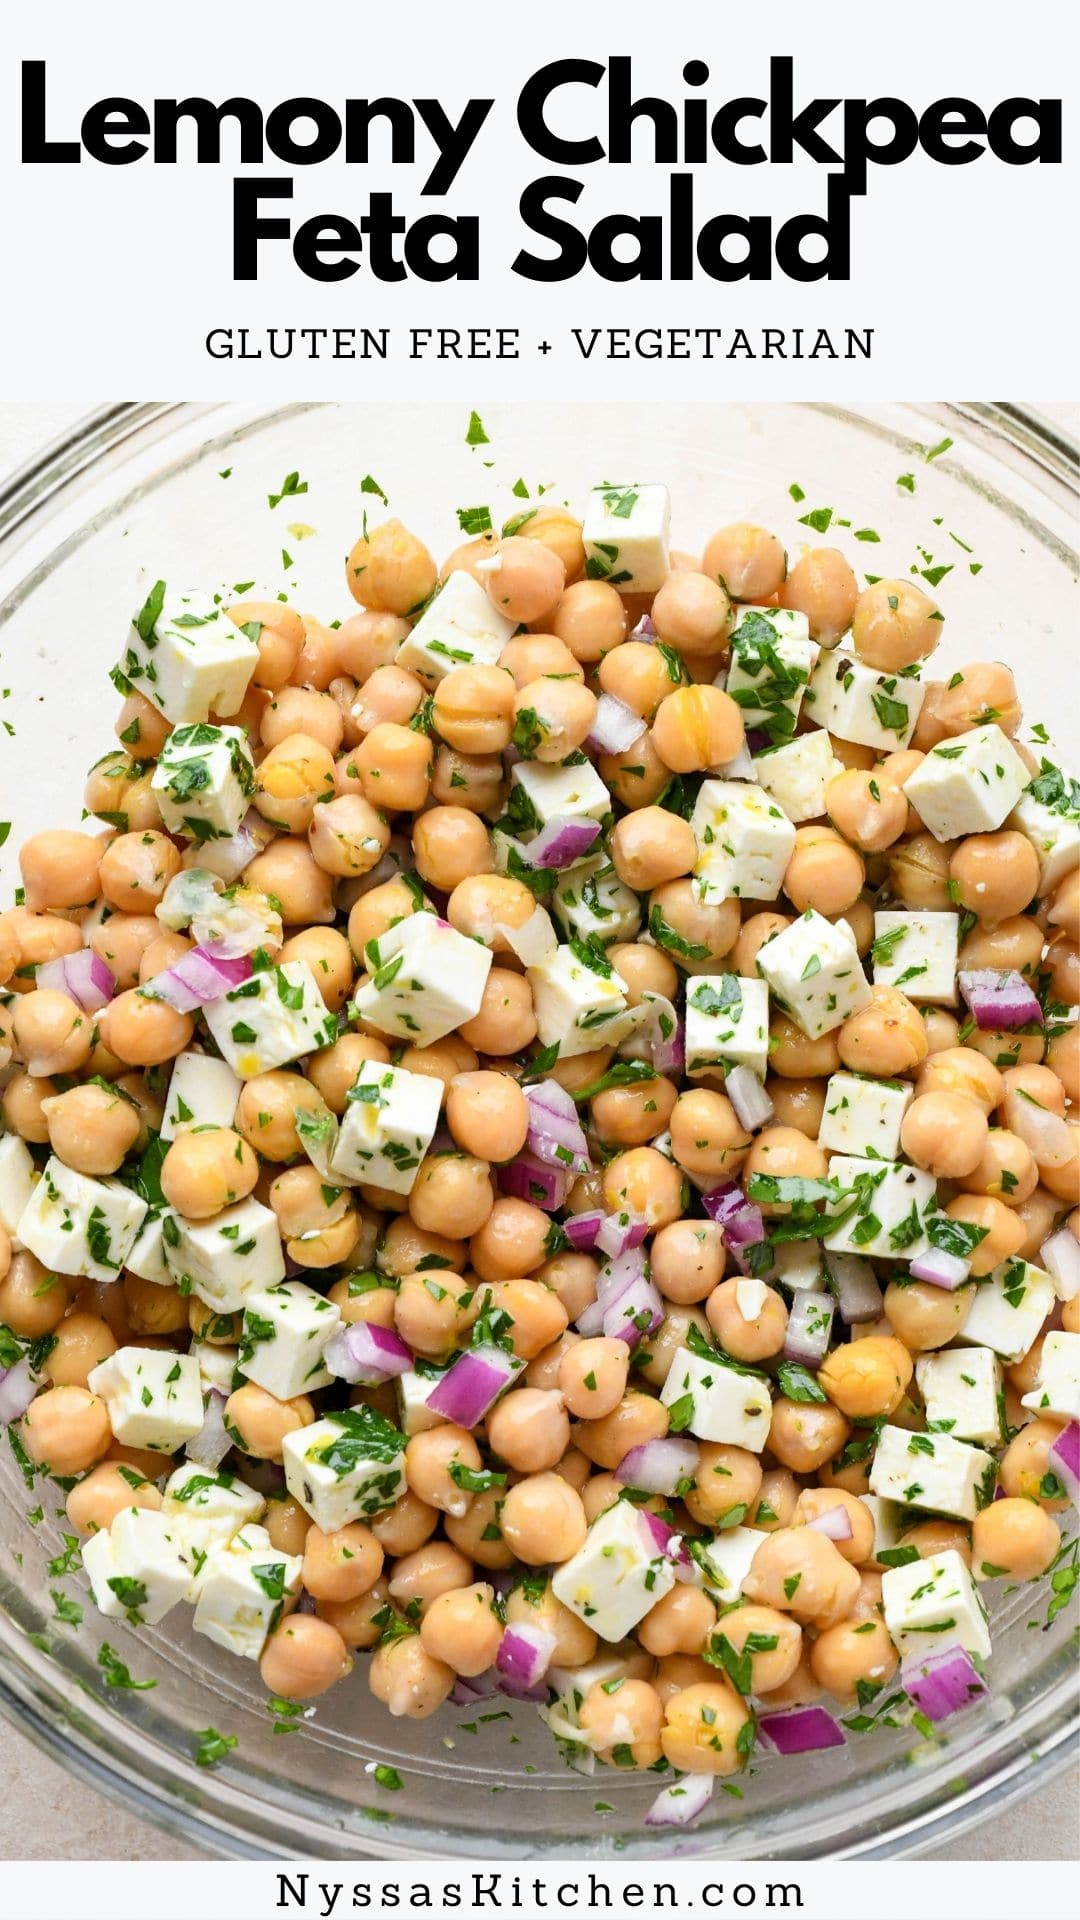 This lemony chickpea feta salad is a super simple and incredibly satisfying summer ready salad that is picnic ready! Made with sturdy chickpeas or garbanzo beans, bright and briny feta cheese, fresh herbs, and a simple lemony vinaigrette. Ready in less than 20 minutes and absolutely packed with flavor! Gluten free, vegetarian, and vegan option.